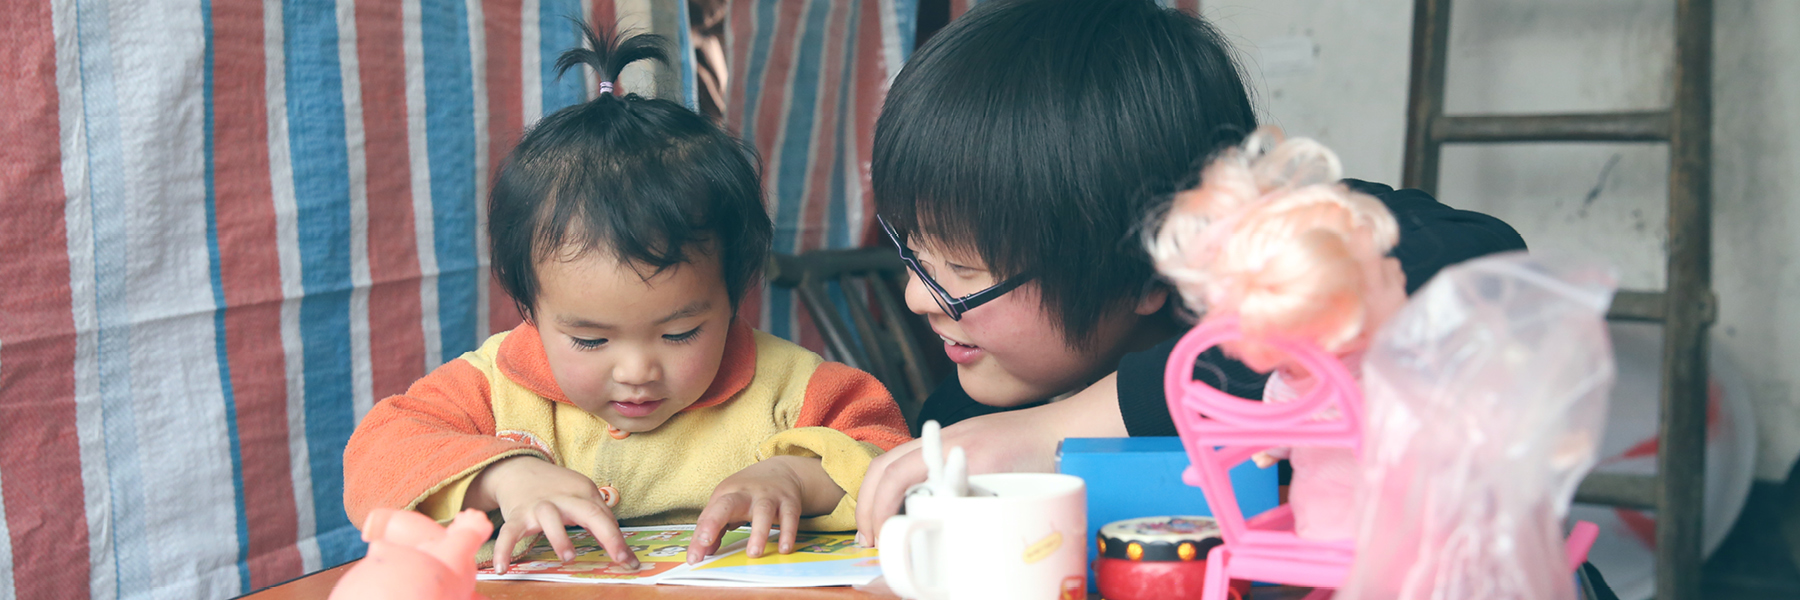 A young child and an adult both with black hair sit at a table, surrounded by childrens toys and reading from a piece of paper together 